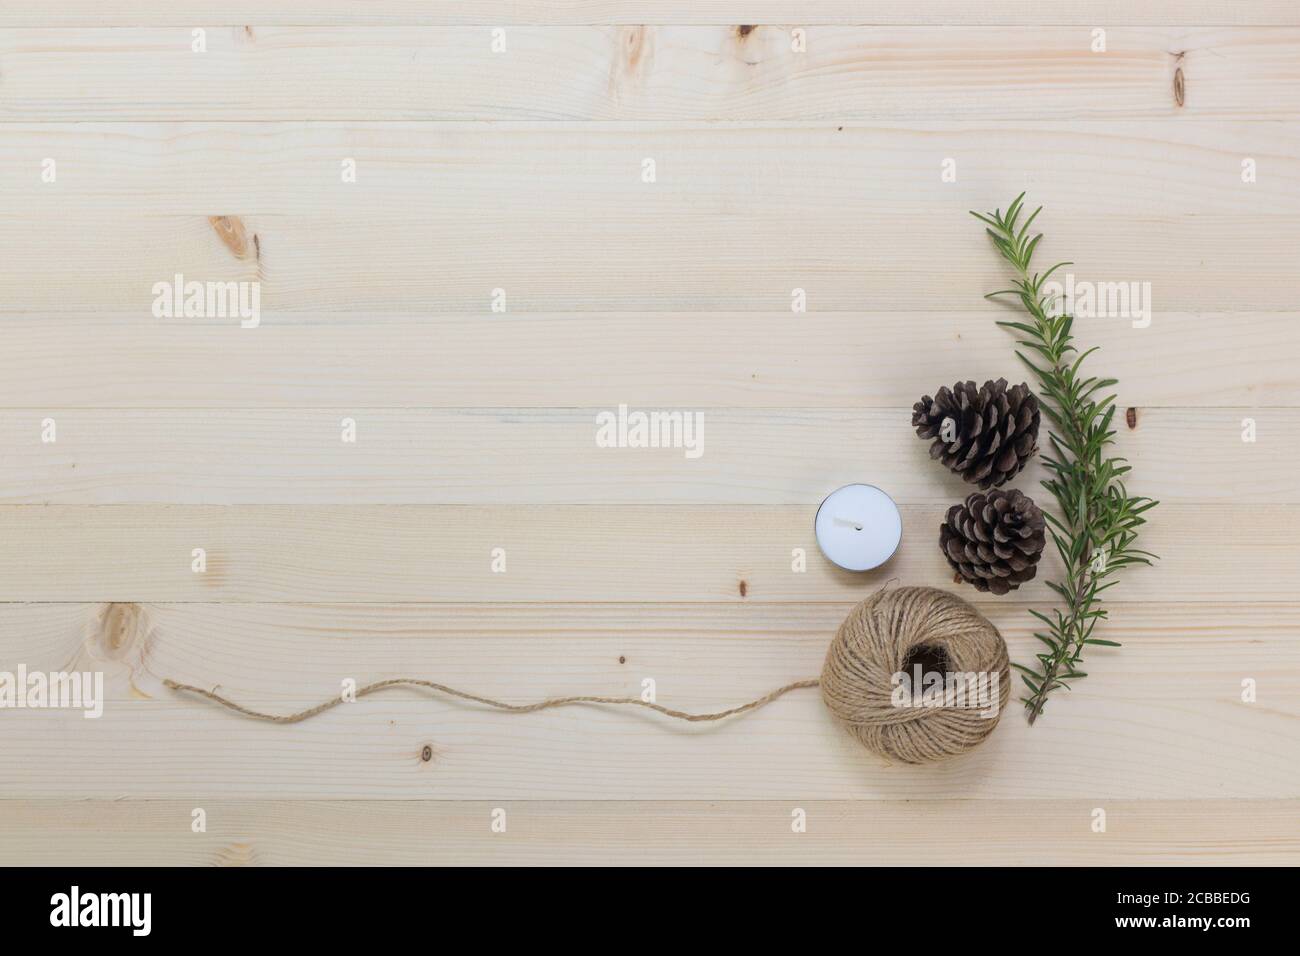 Ornaments for decorating the christmas tree placed on the pine wood background. Stock Photo